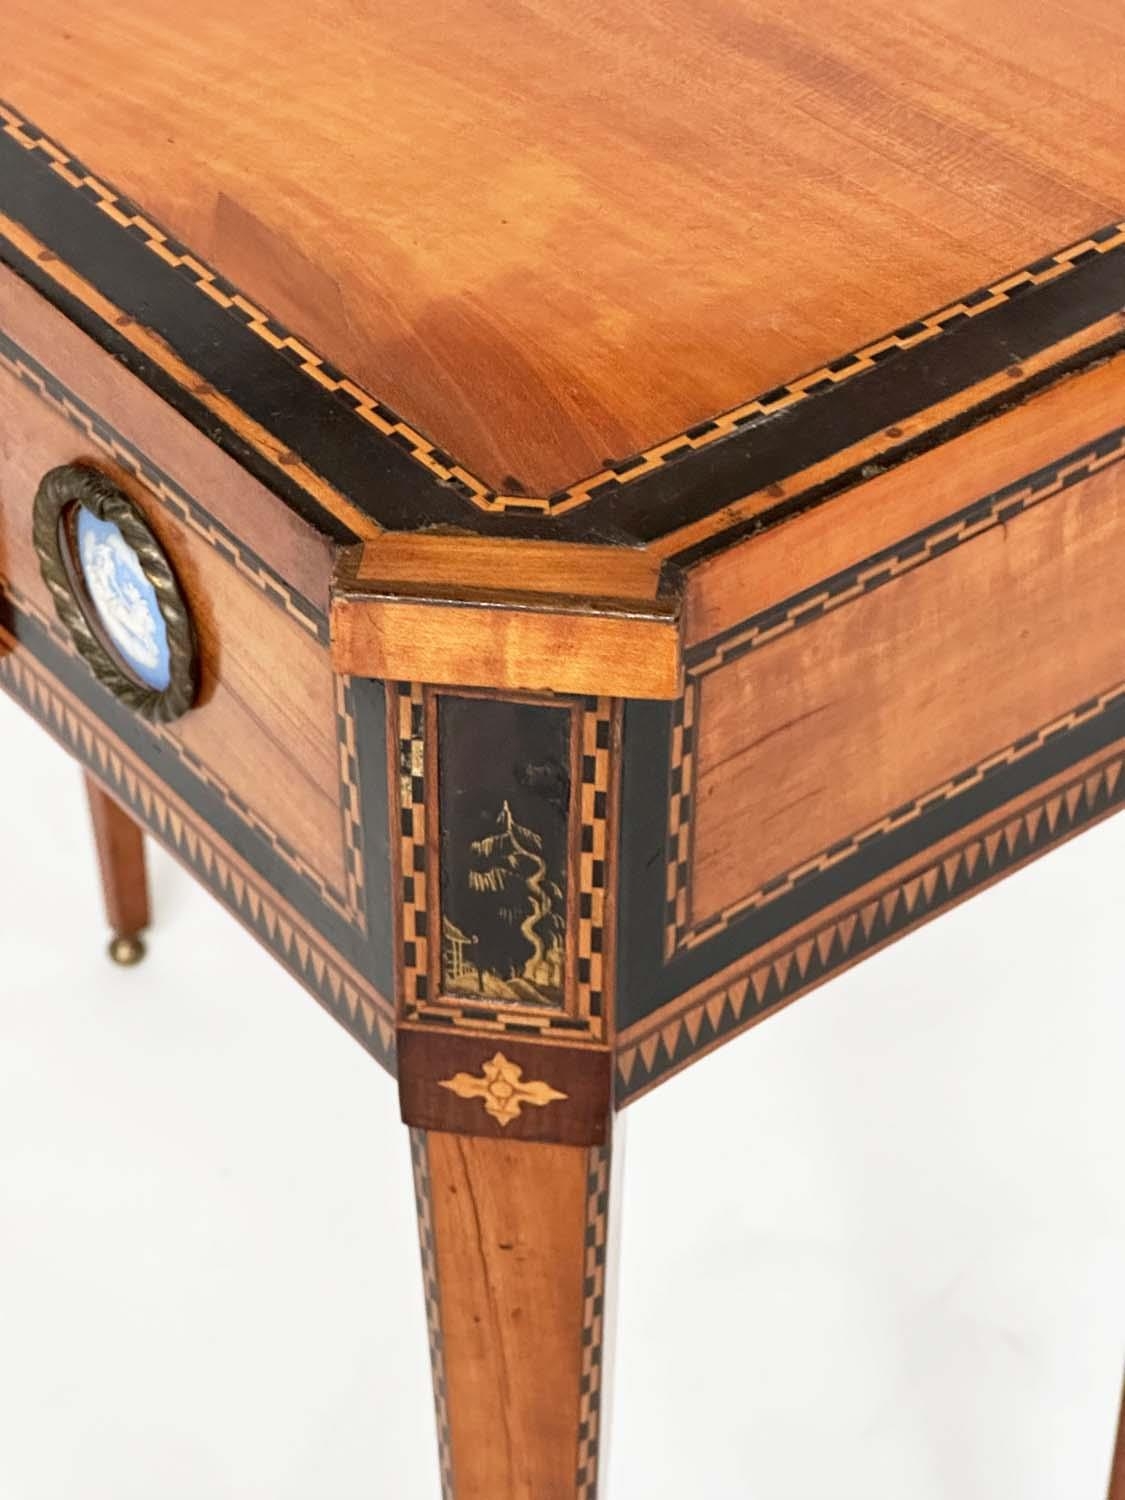 DUTCH HALL TABLE, early 19th century satinwood and ebony of breakfront form with full width frieze - Image 3 of 8